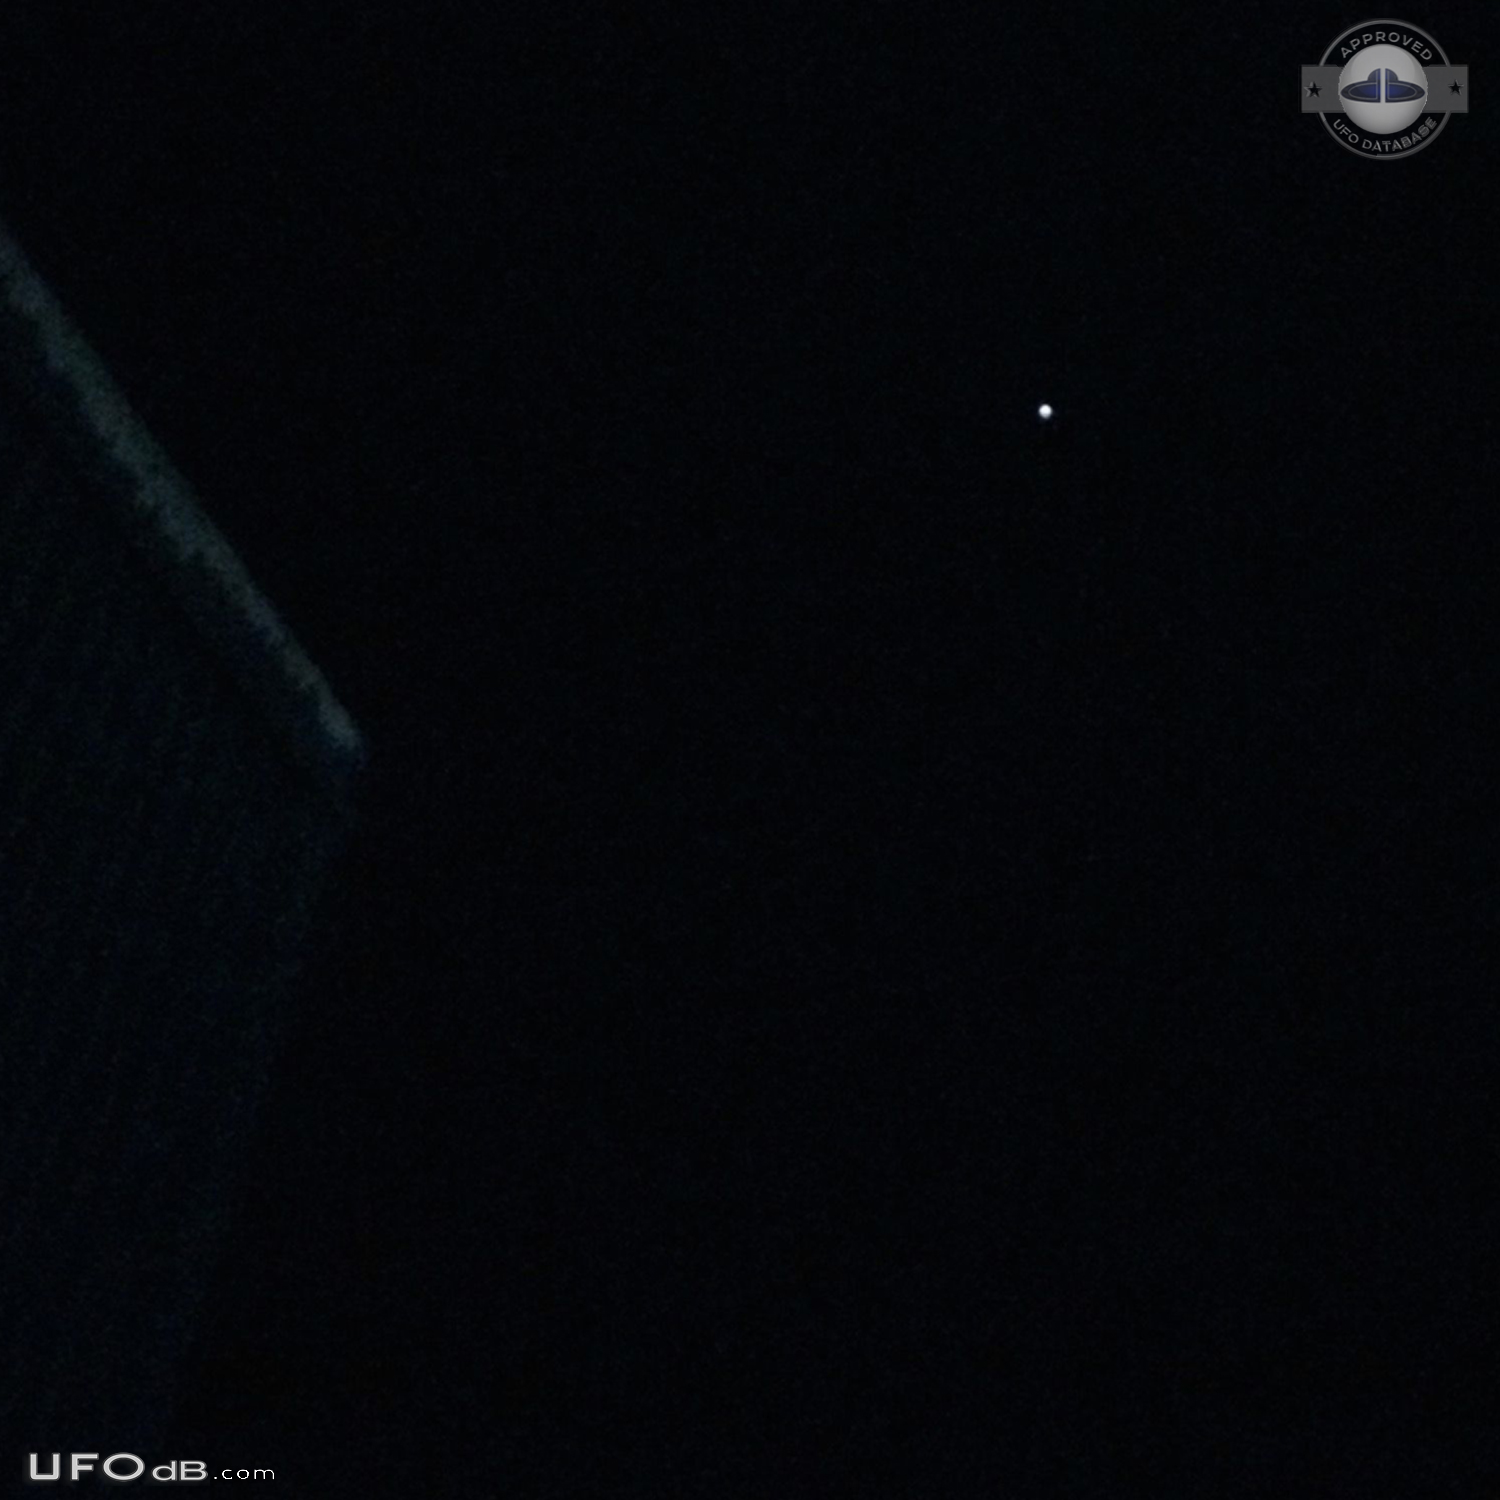 Was curious , below a star seemed there was a UFO Toronto Ontario Cana UFO Picture #784-2